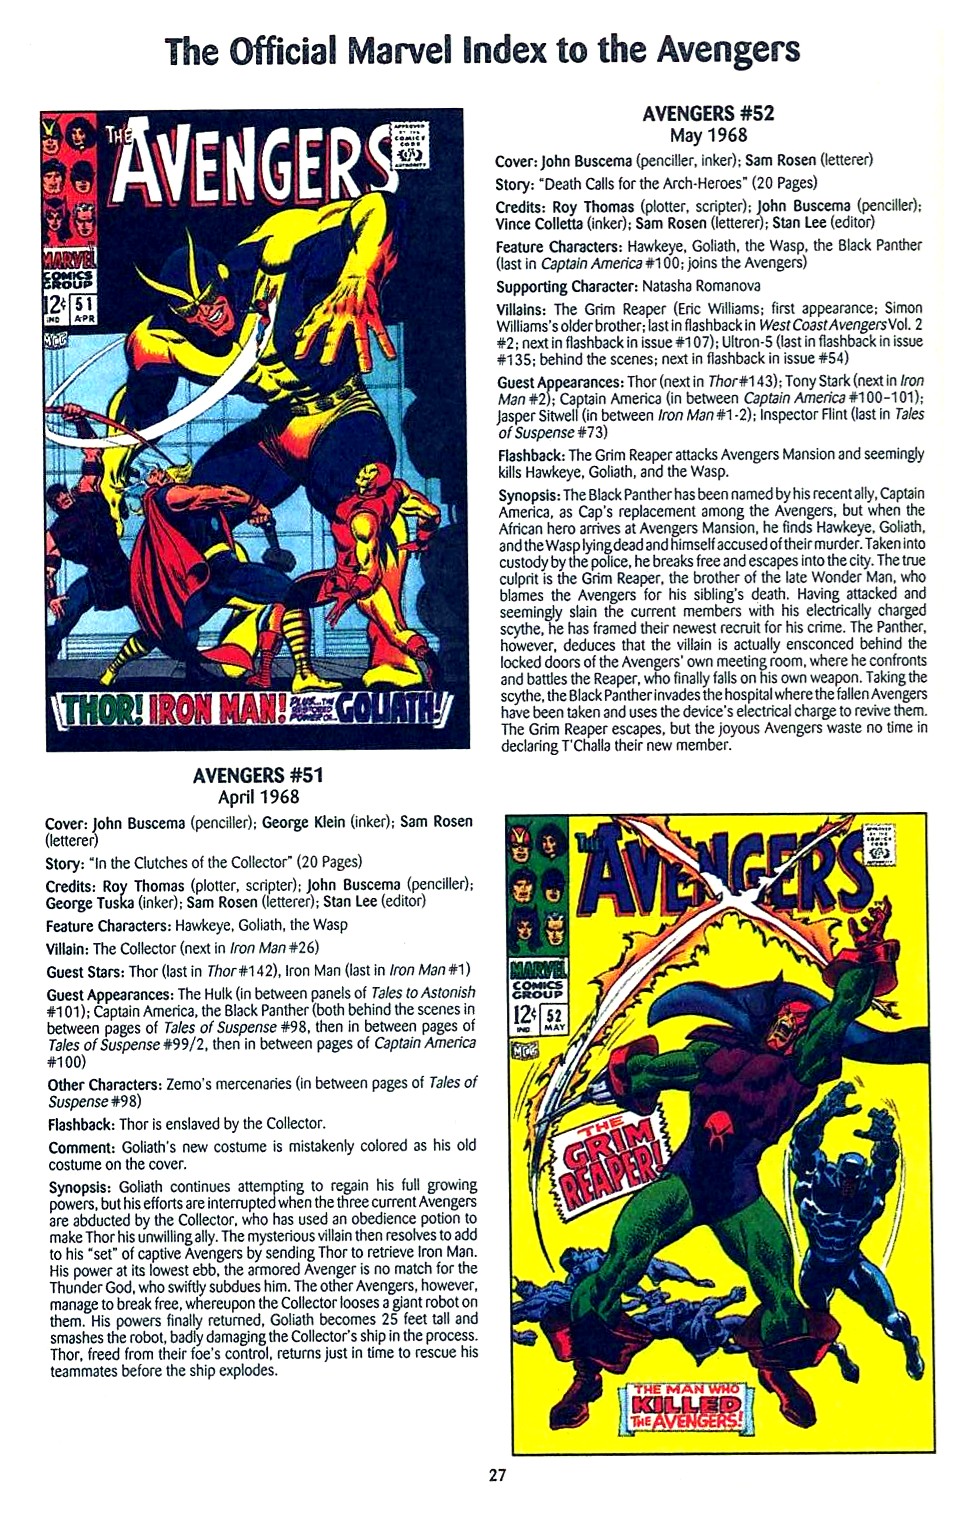 Read online The Official Marvel Index to the Avengers comic -  Issue #1 - 29